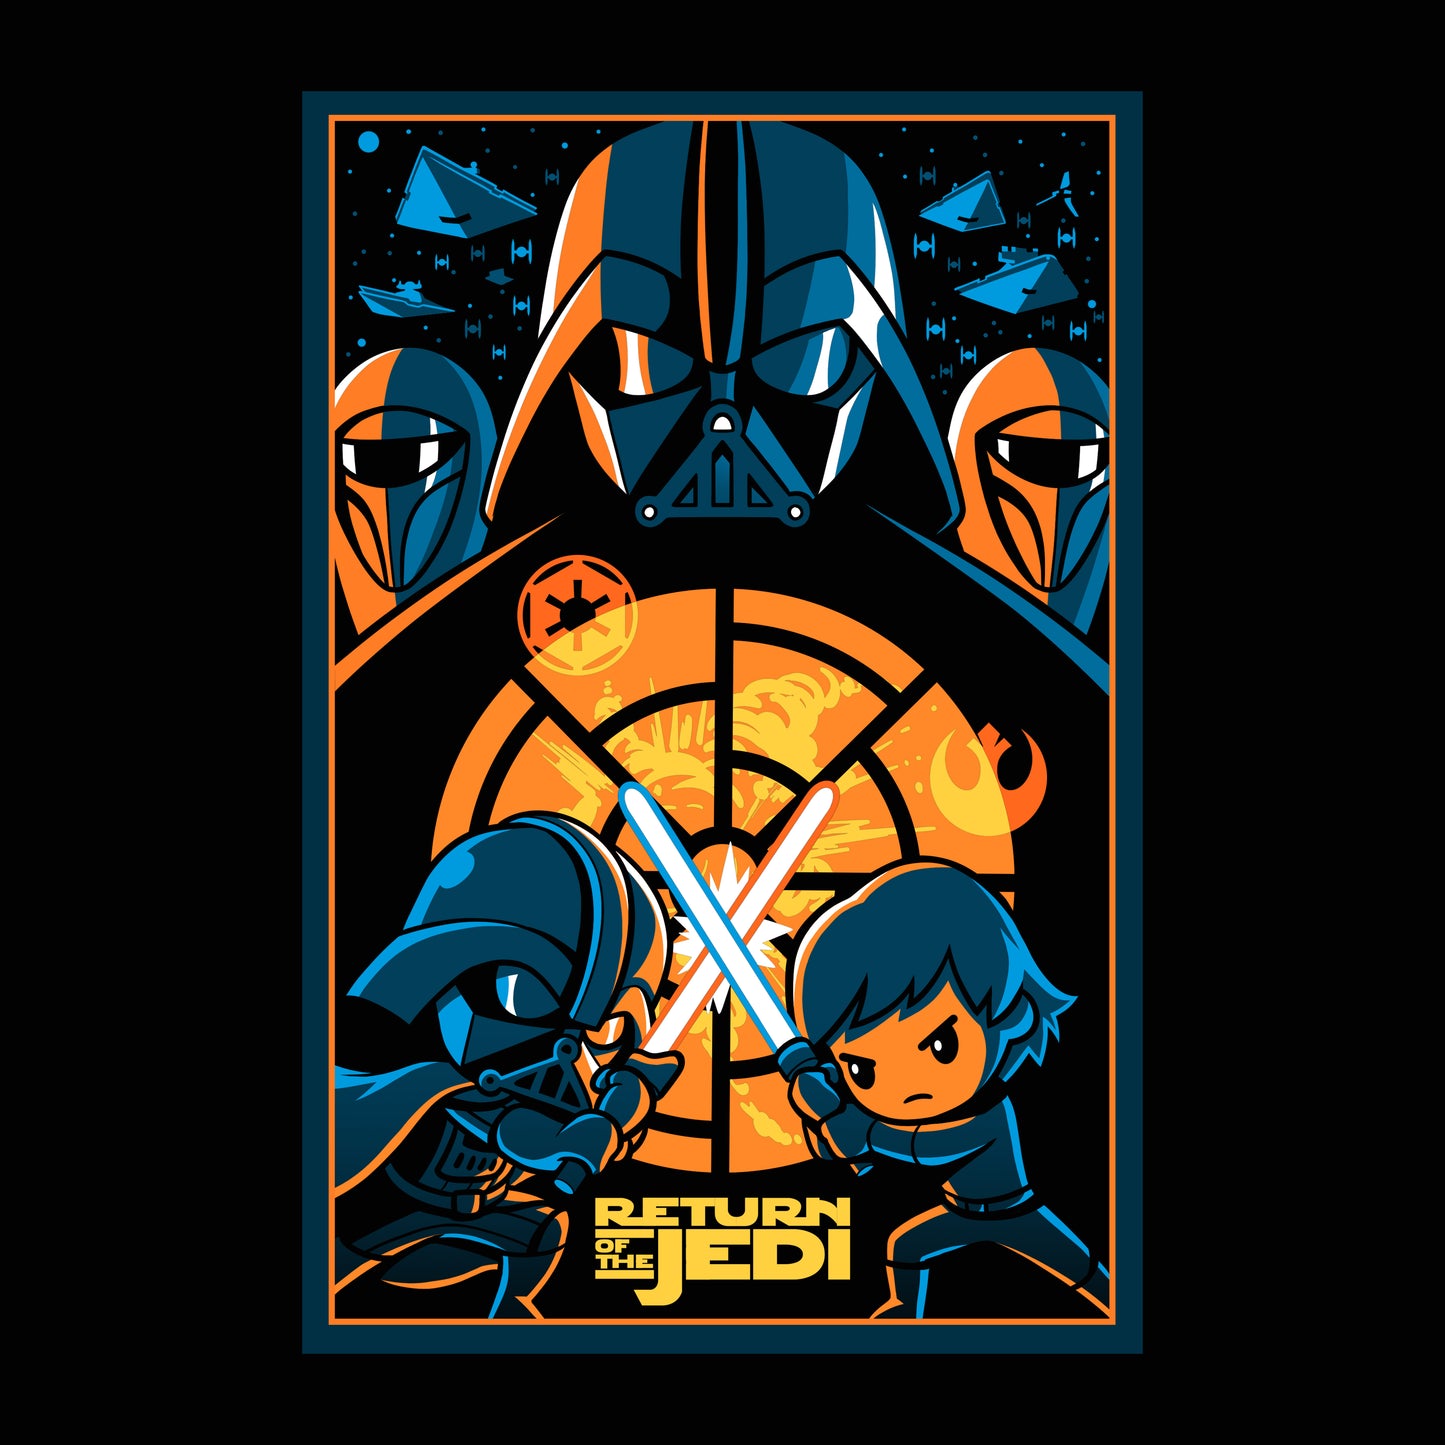 An officially licensed Star Wars poster featuring cartoon characters Darth Vader and Luke Skywalker, called the Return Of The Jedi Battle Poster.